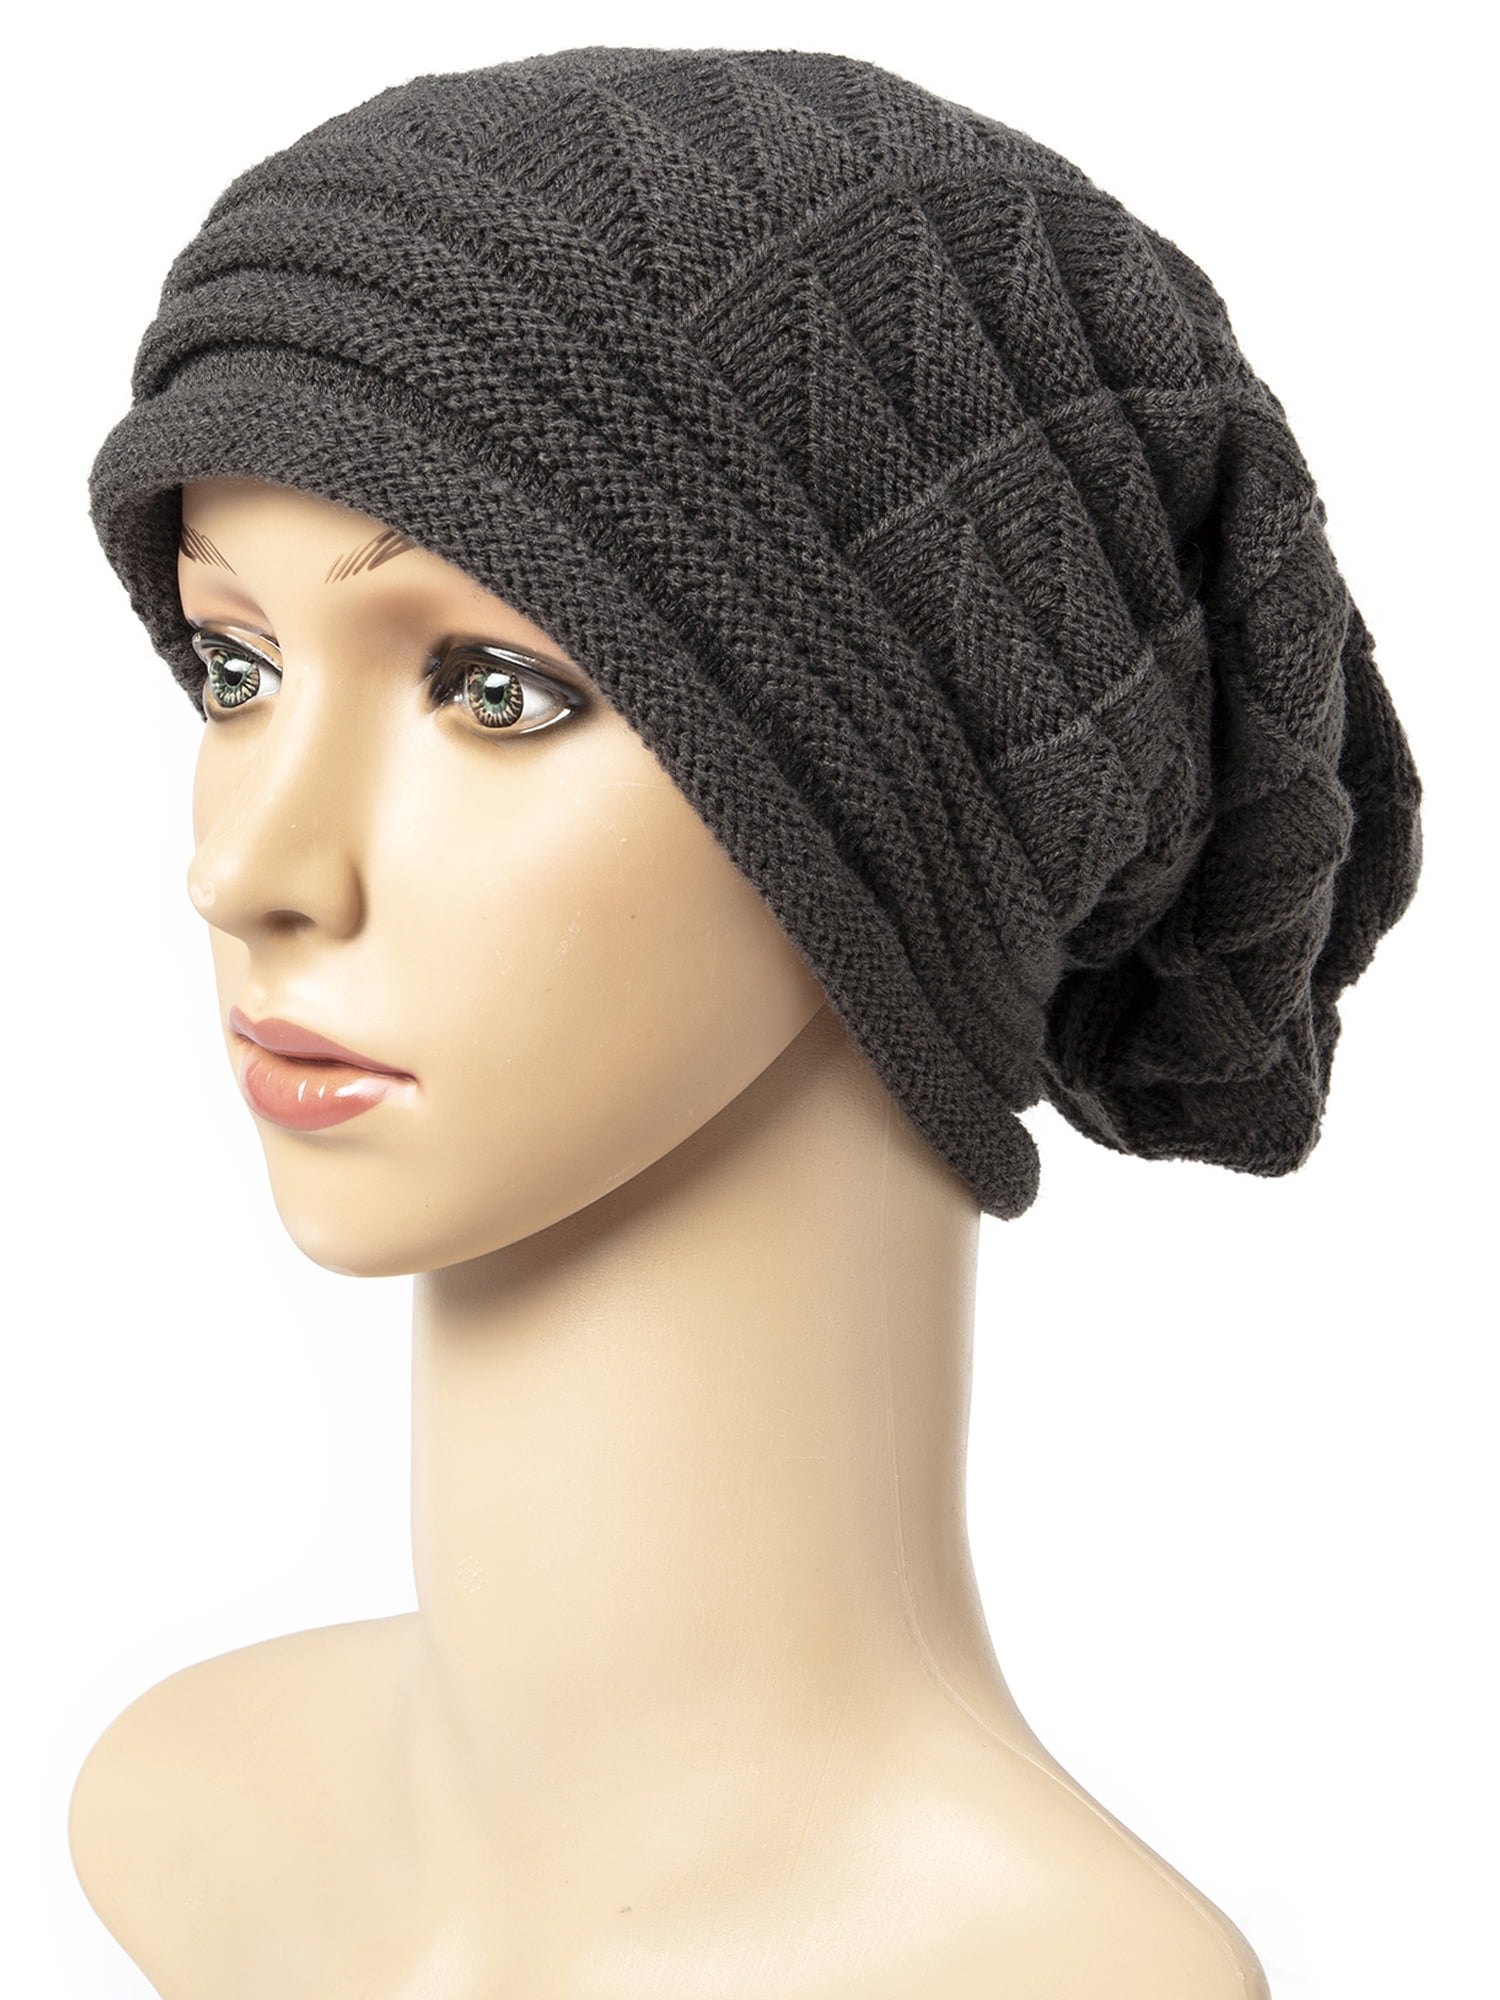 Casual Female Warm Knitted Hats Women Fashion Winter hat Chunky Bulky Knit Handmade Soft caps Hats 